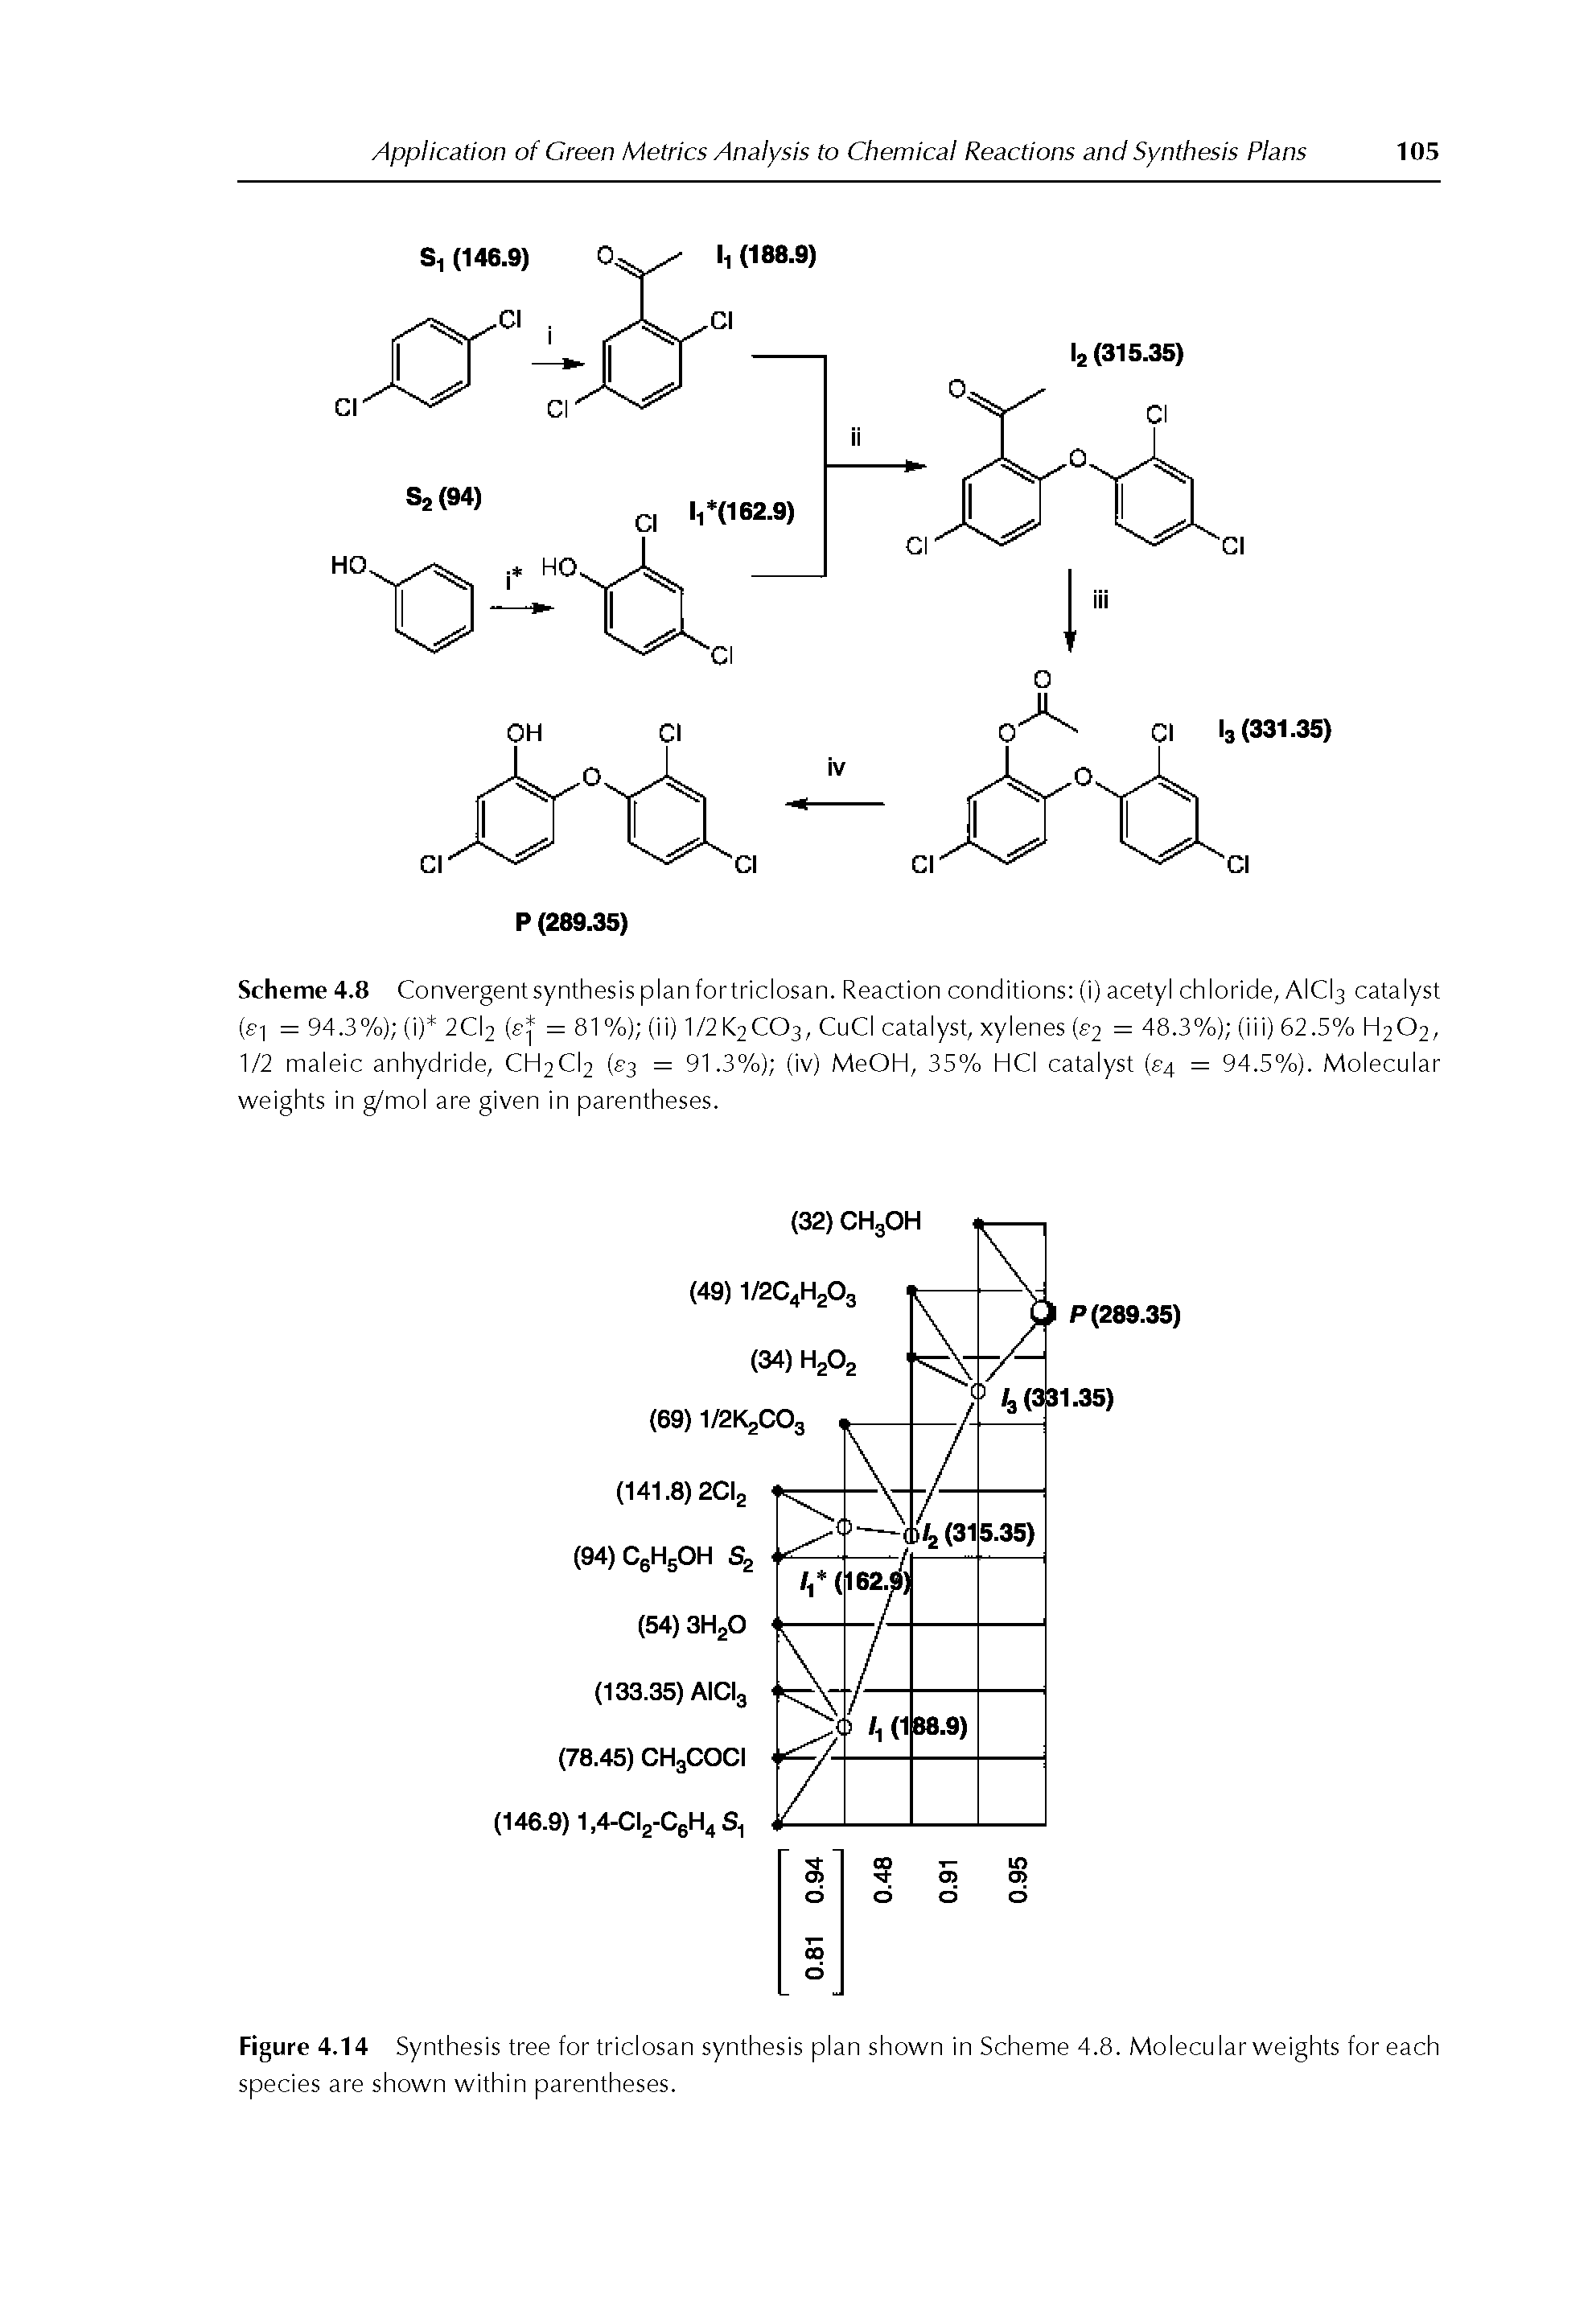 Scheme 4.8 Convergent synthesis plan fortriclosan. Reaction conditions (i) acetyl chloride, AICI3 catalyst (ei = 94.3%) (i) 2CI2 (ef = 81 %) (ii) I/2K2CO3, CuCI catalyst, xylenes (s2 = 48.3%) (iii) 62.5% H2O2, 1/2 maleic anhydride, CH2CI2 ( 3 = 91.3%) (iv) MeOH, 35% HCI catalyst ( 4 = 94.5%). Molecular weights in g/mol are given in parentheses.